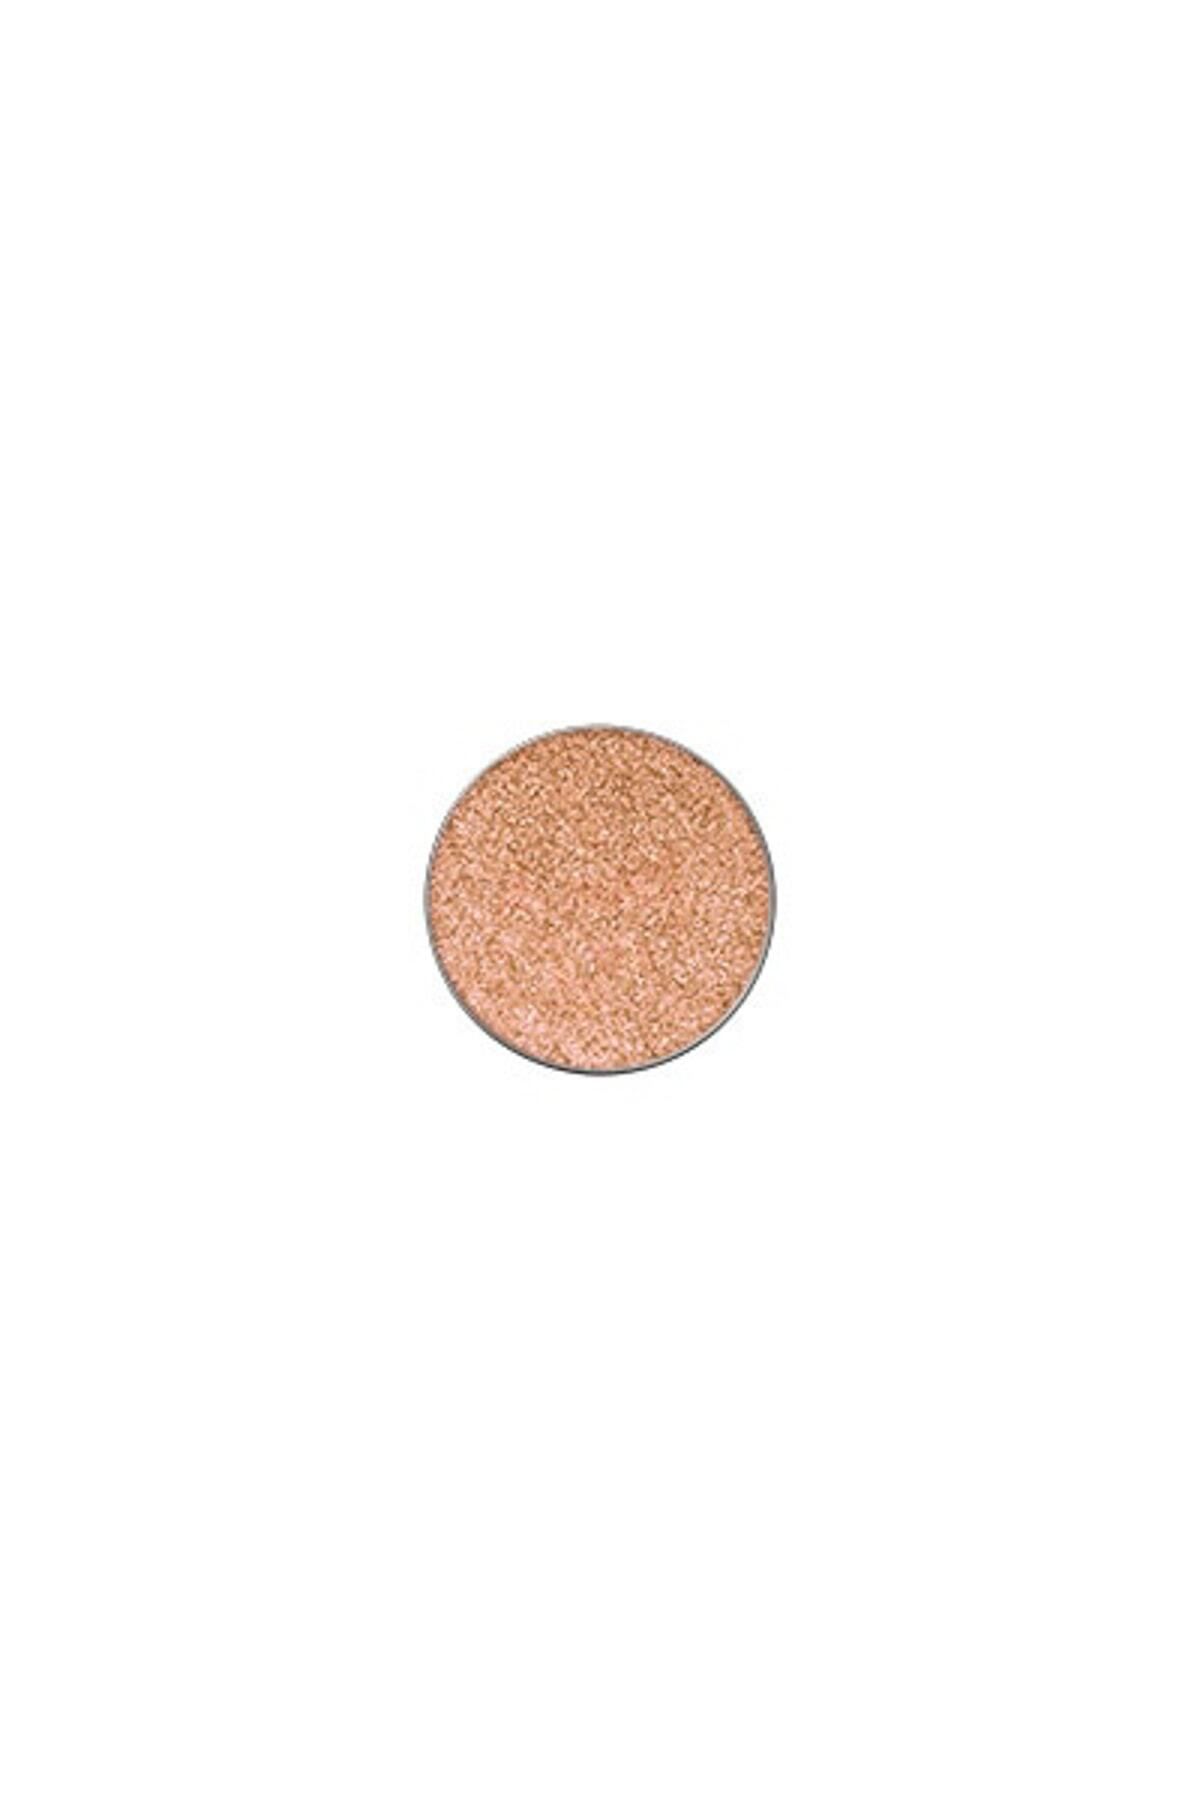 Mac Refill Far - Dazzleshadow Extreme Pro Palette Refill Pan Yes To Sequins 773602567713